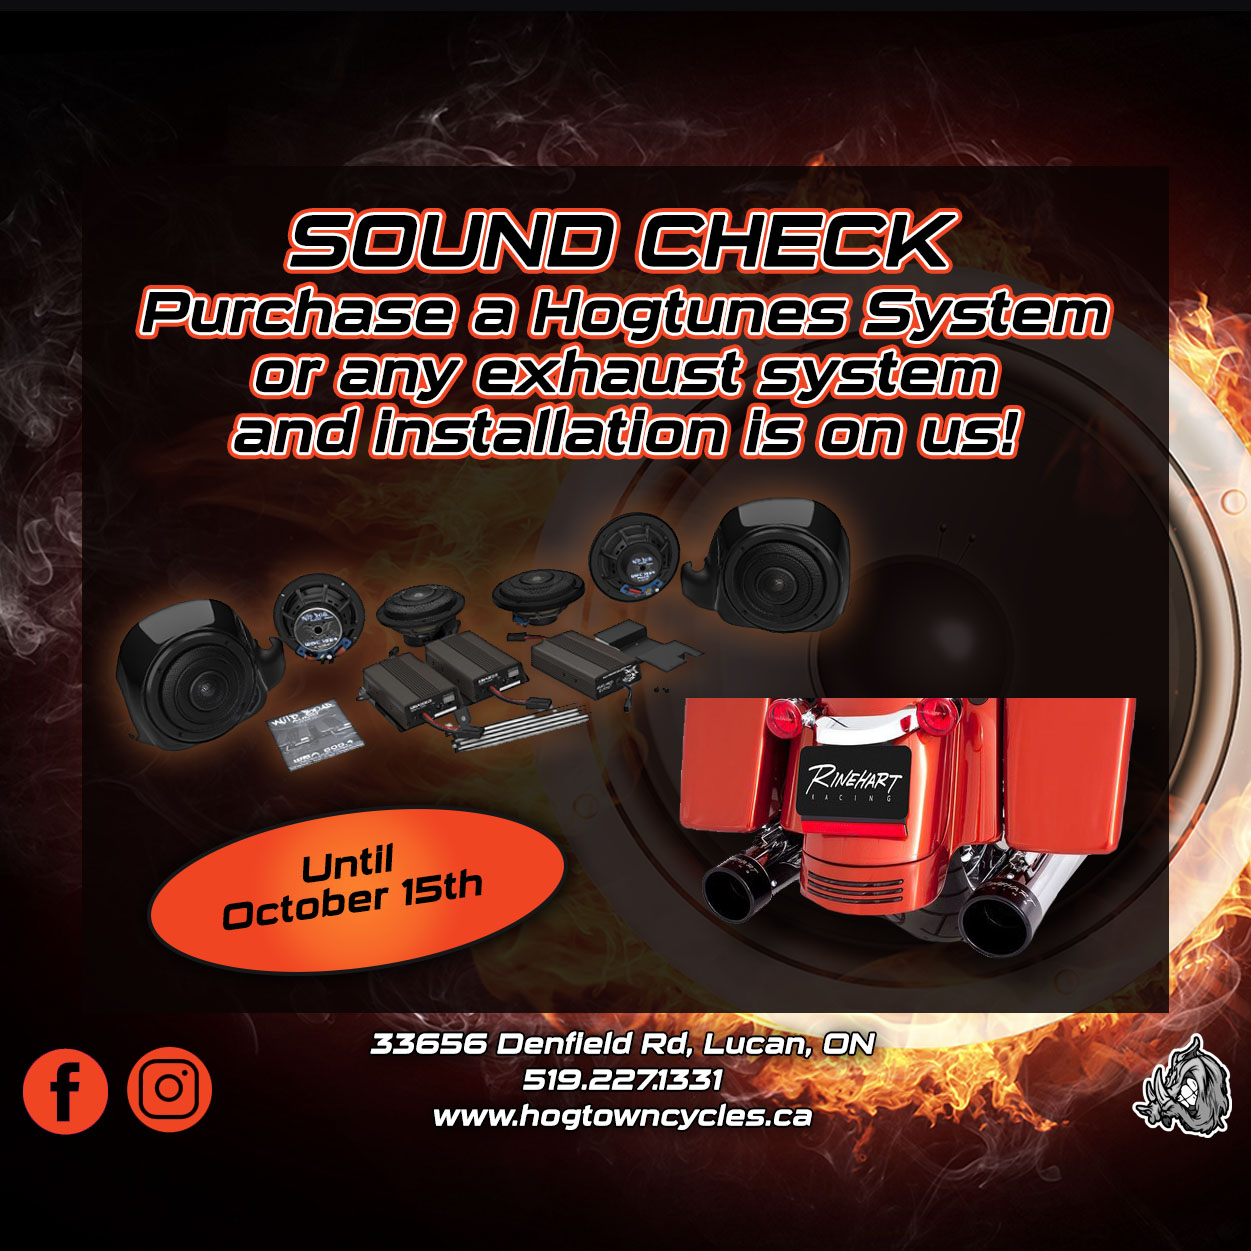 Choose your sound - free installation with purchase of Hogtunes or exhaust system